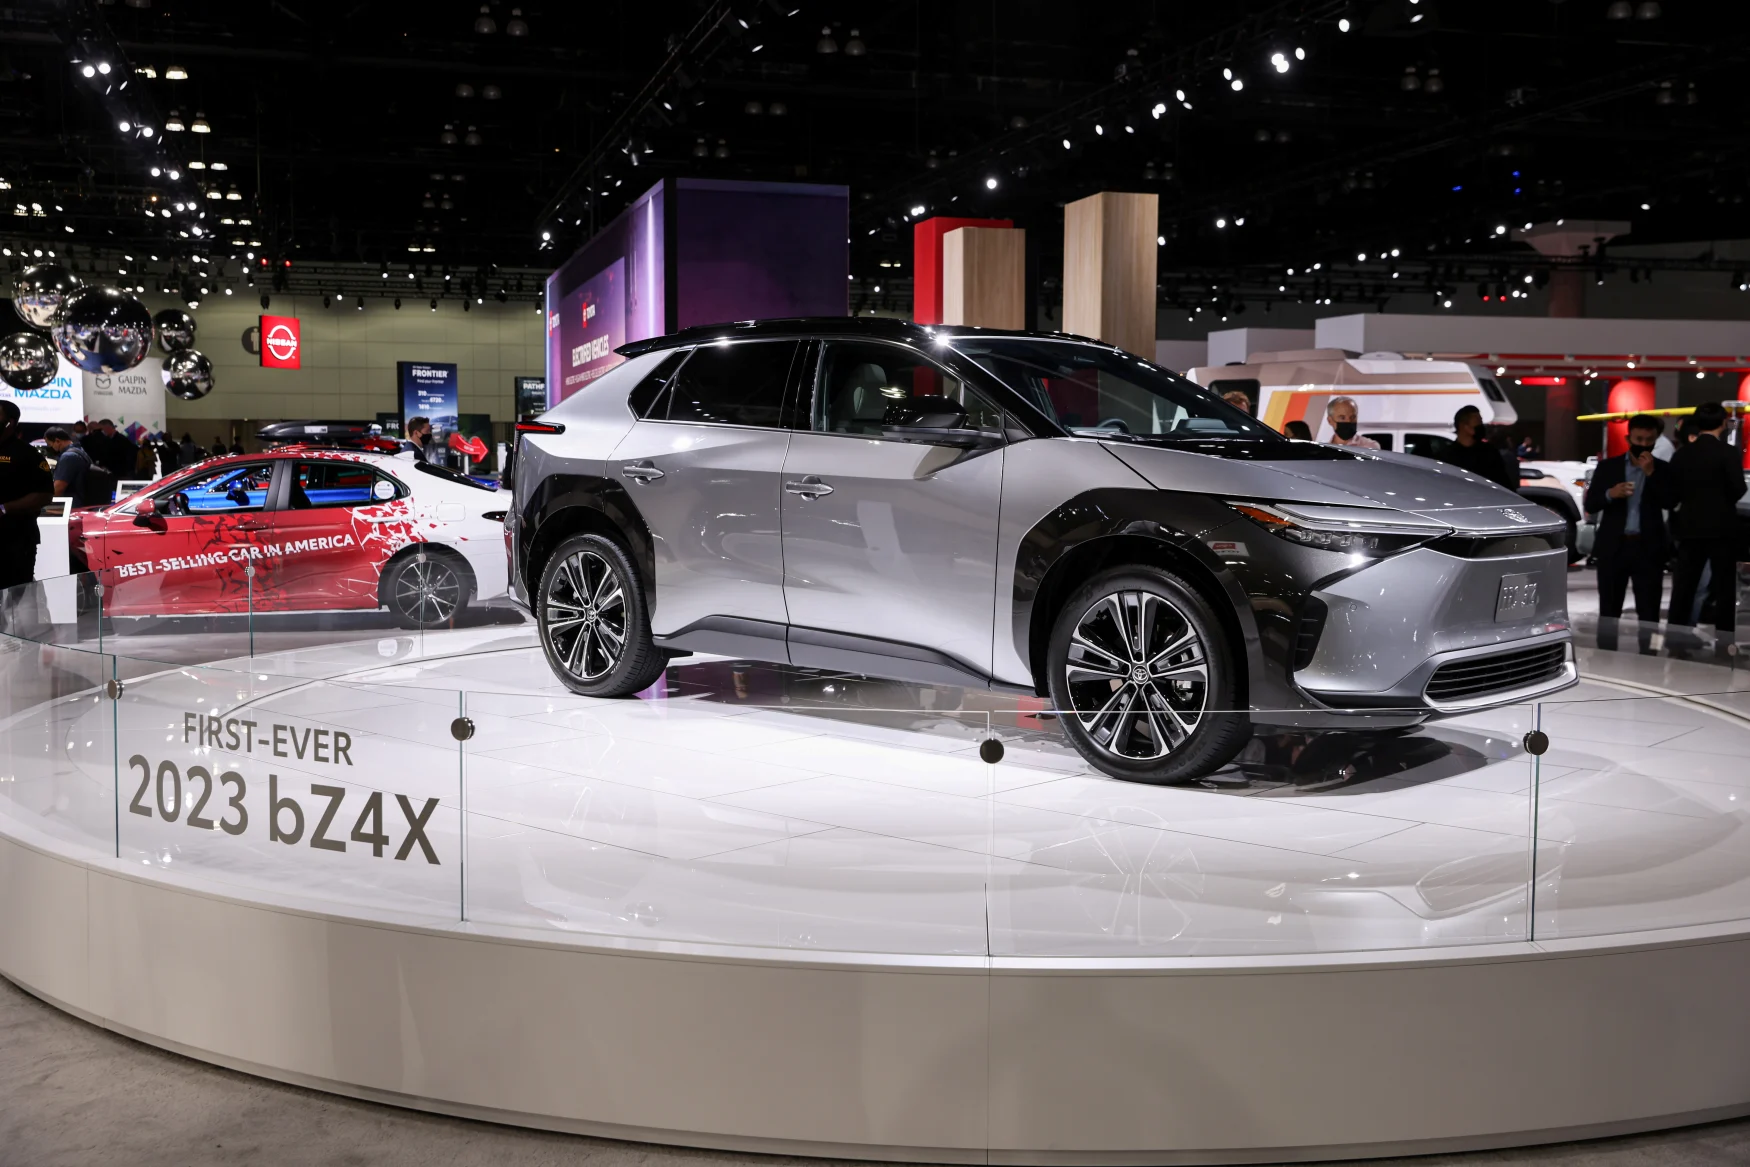 The 2023 Toyota bZ4X all-electric SUV is displayed during the 2021 LA Auto Show in Los Angeles, California, U.S. November 17, 2021. REUTERS/Mike Blake